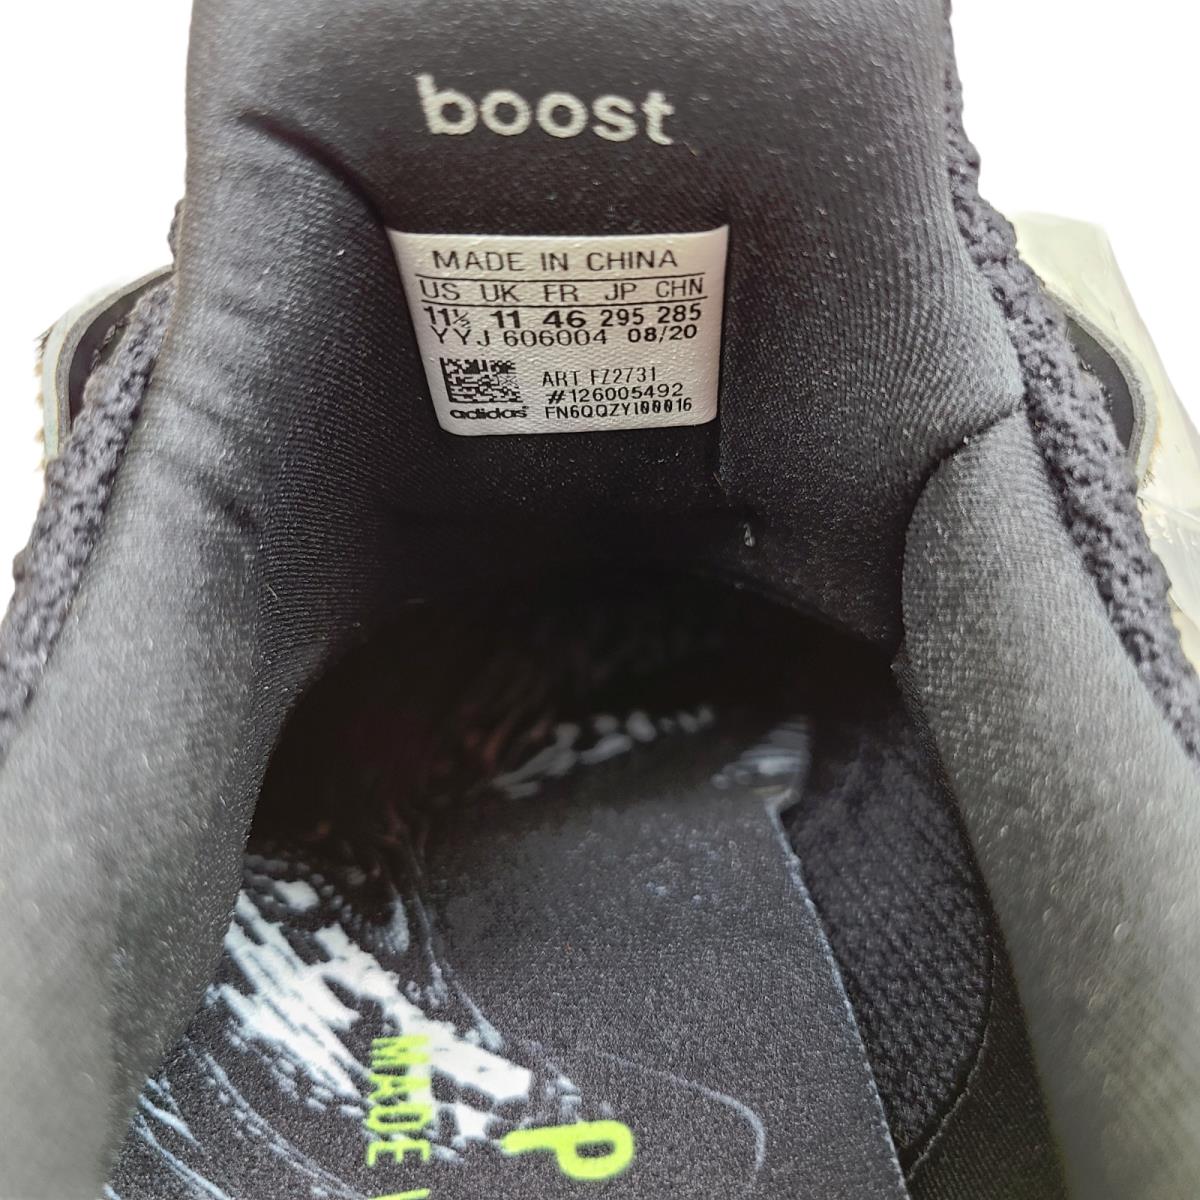 Adidas shoes UltraBoost DNA 39